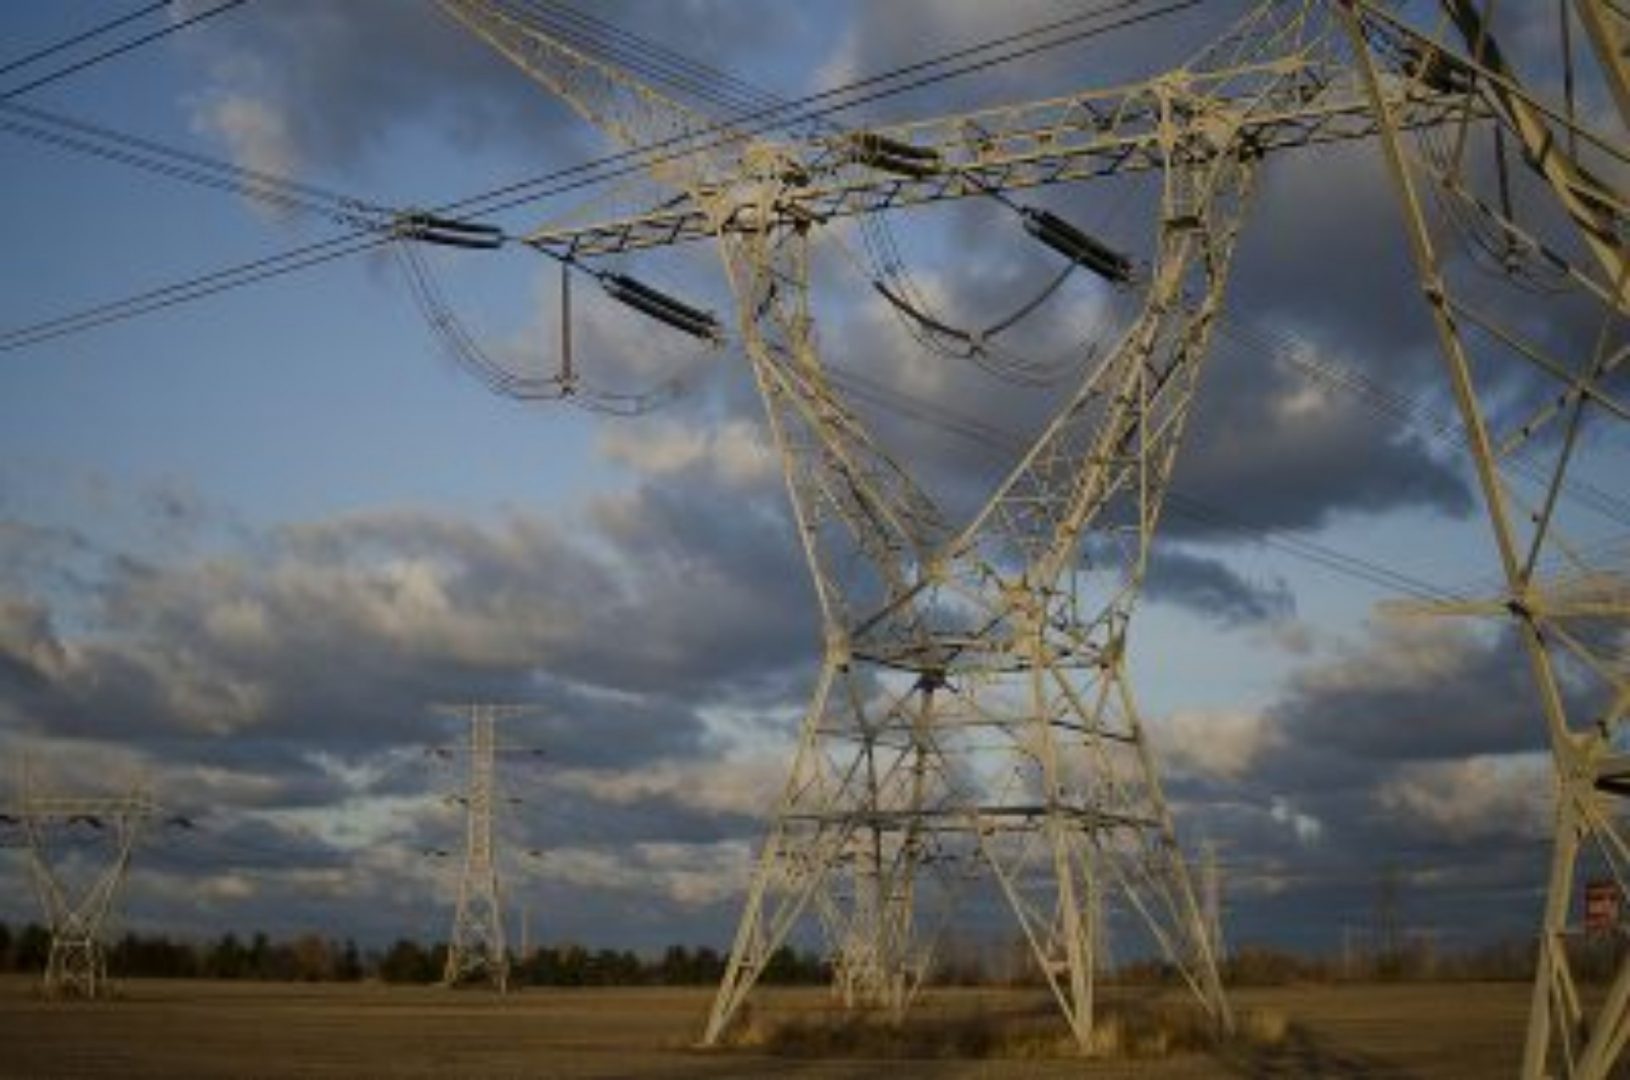 One analysis has found that joining the nation's separate power grids could have significant benefits. 